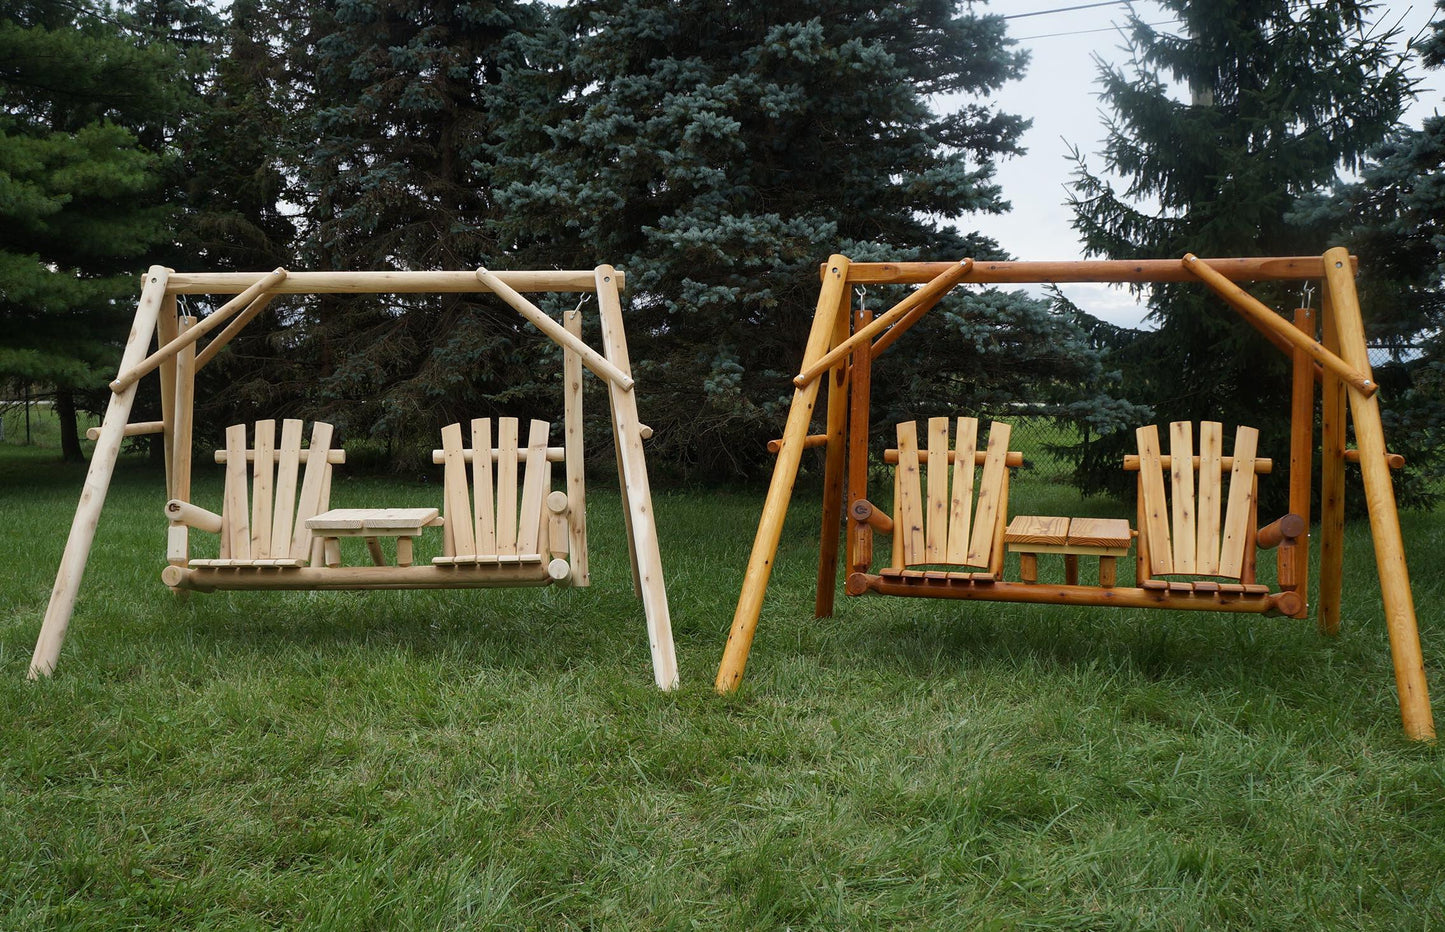 Moon Valley Rustic Tete-a-tete Lawn Swing - LEAD TIME TO SHIP: (UNFINISHED - 2 WEEKS) - (FINISHED - 4 WEEKS)